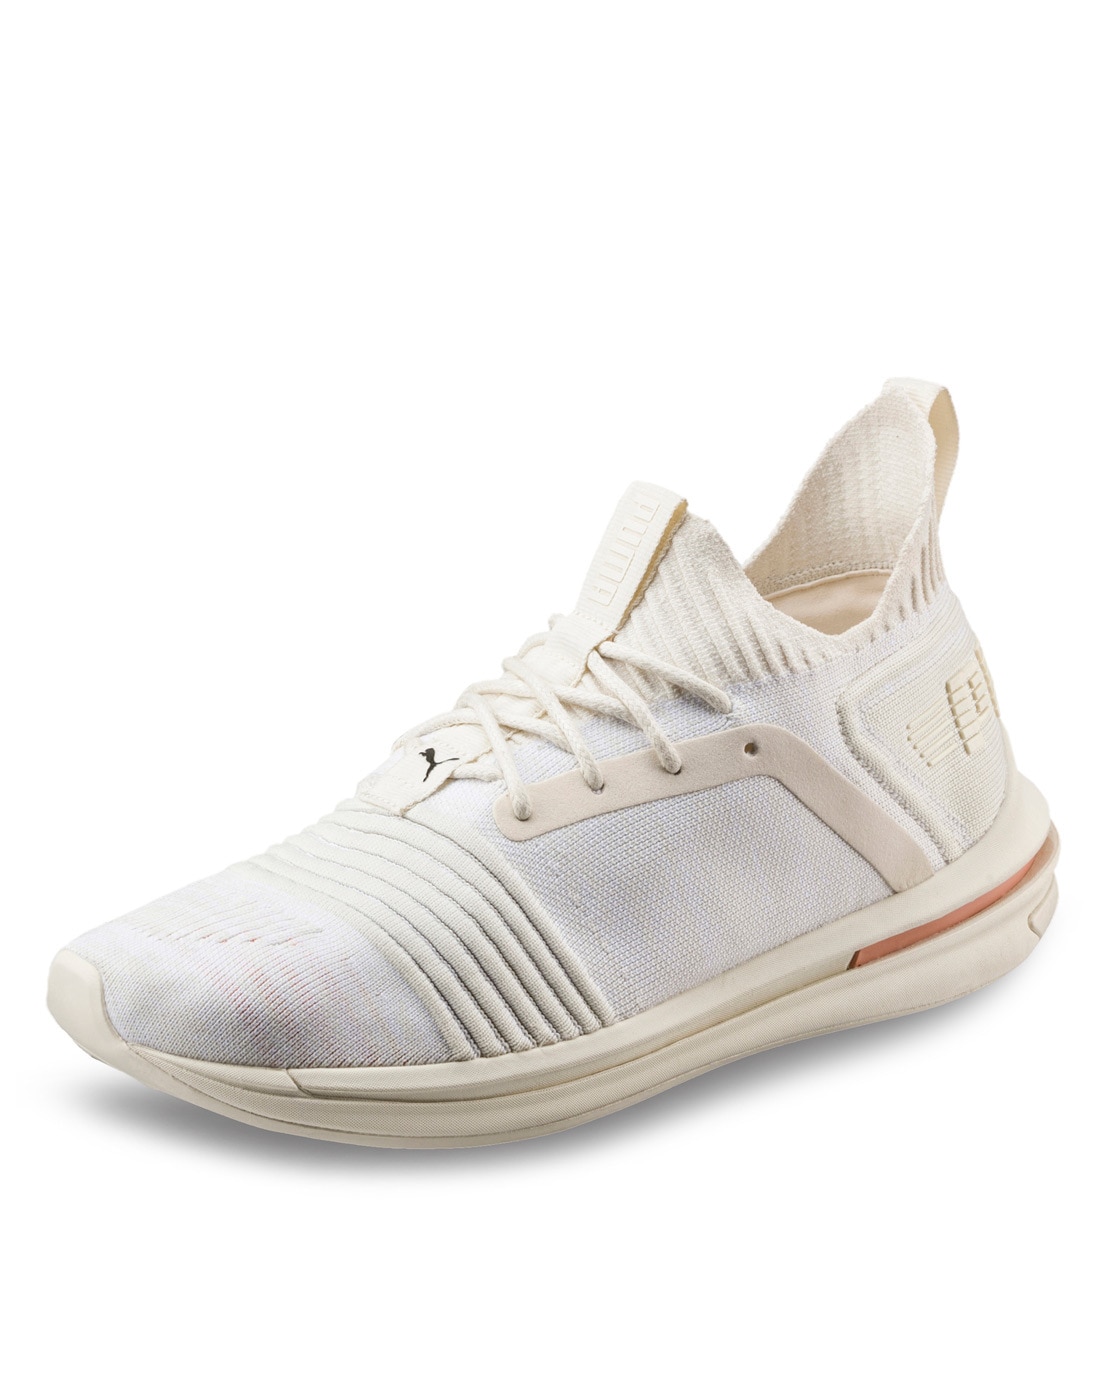 men's puma ignite limitless casual shoes